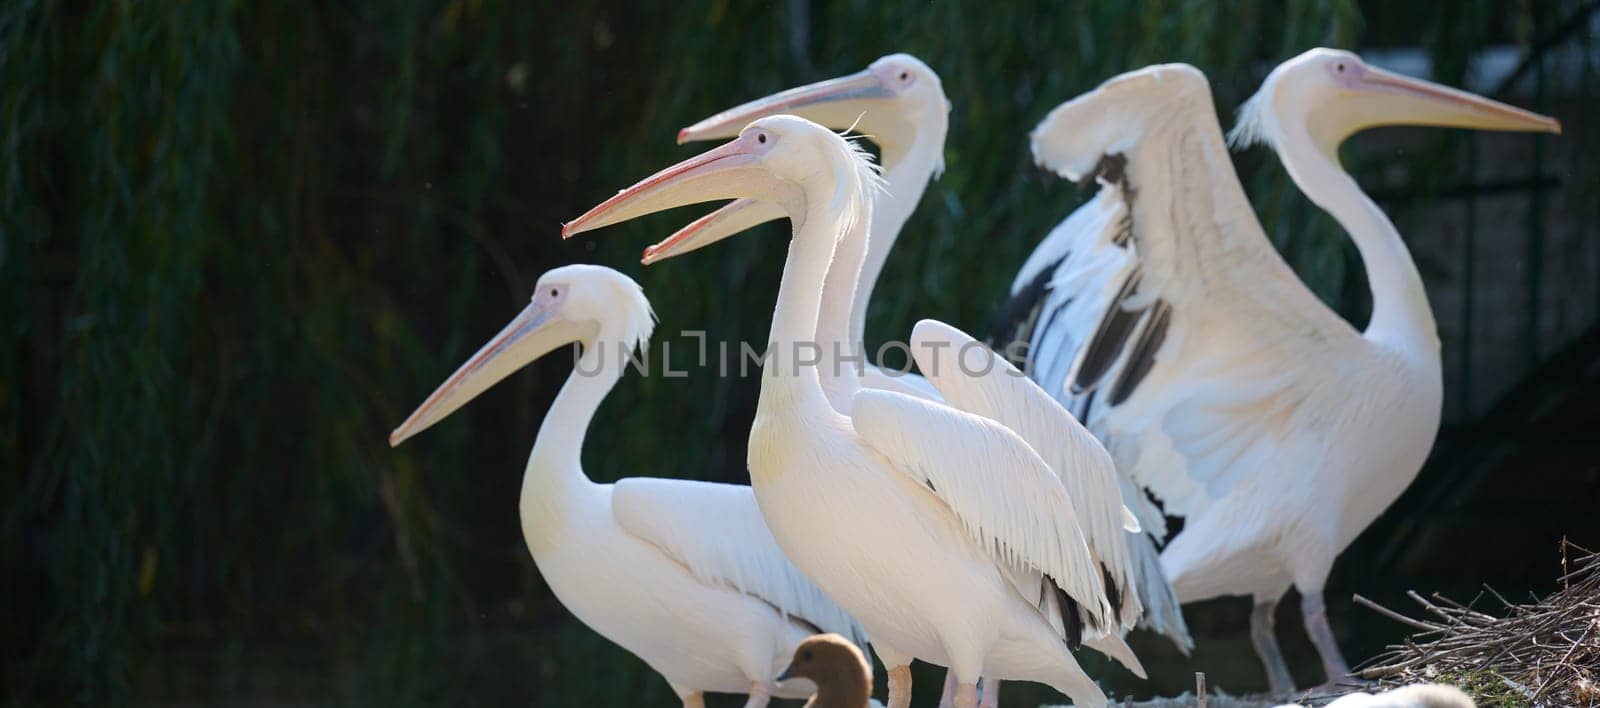 A flock of white pelicans on a pond on an autumn day by ndanko